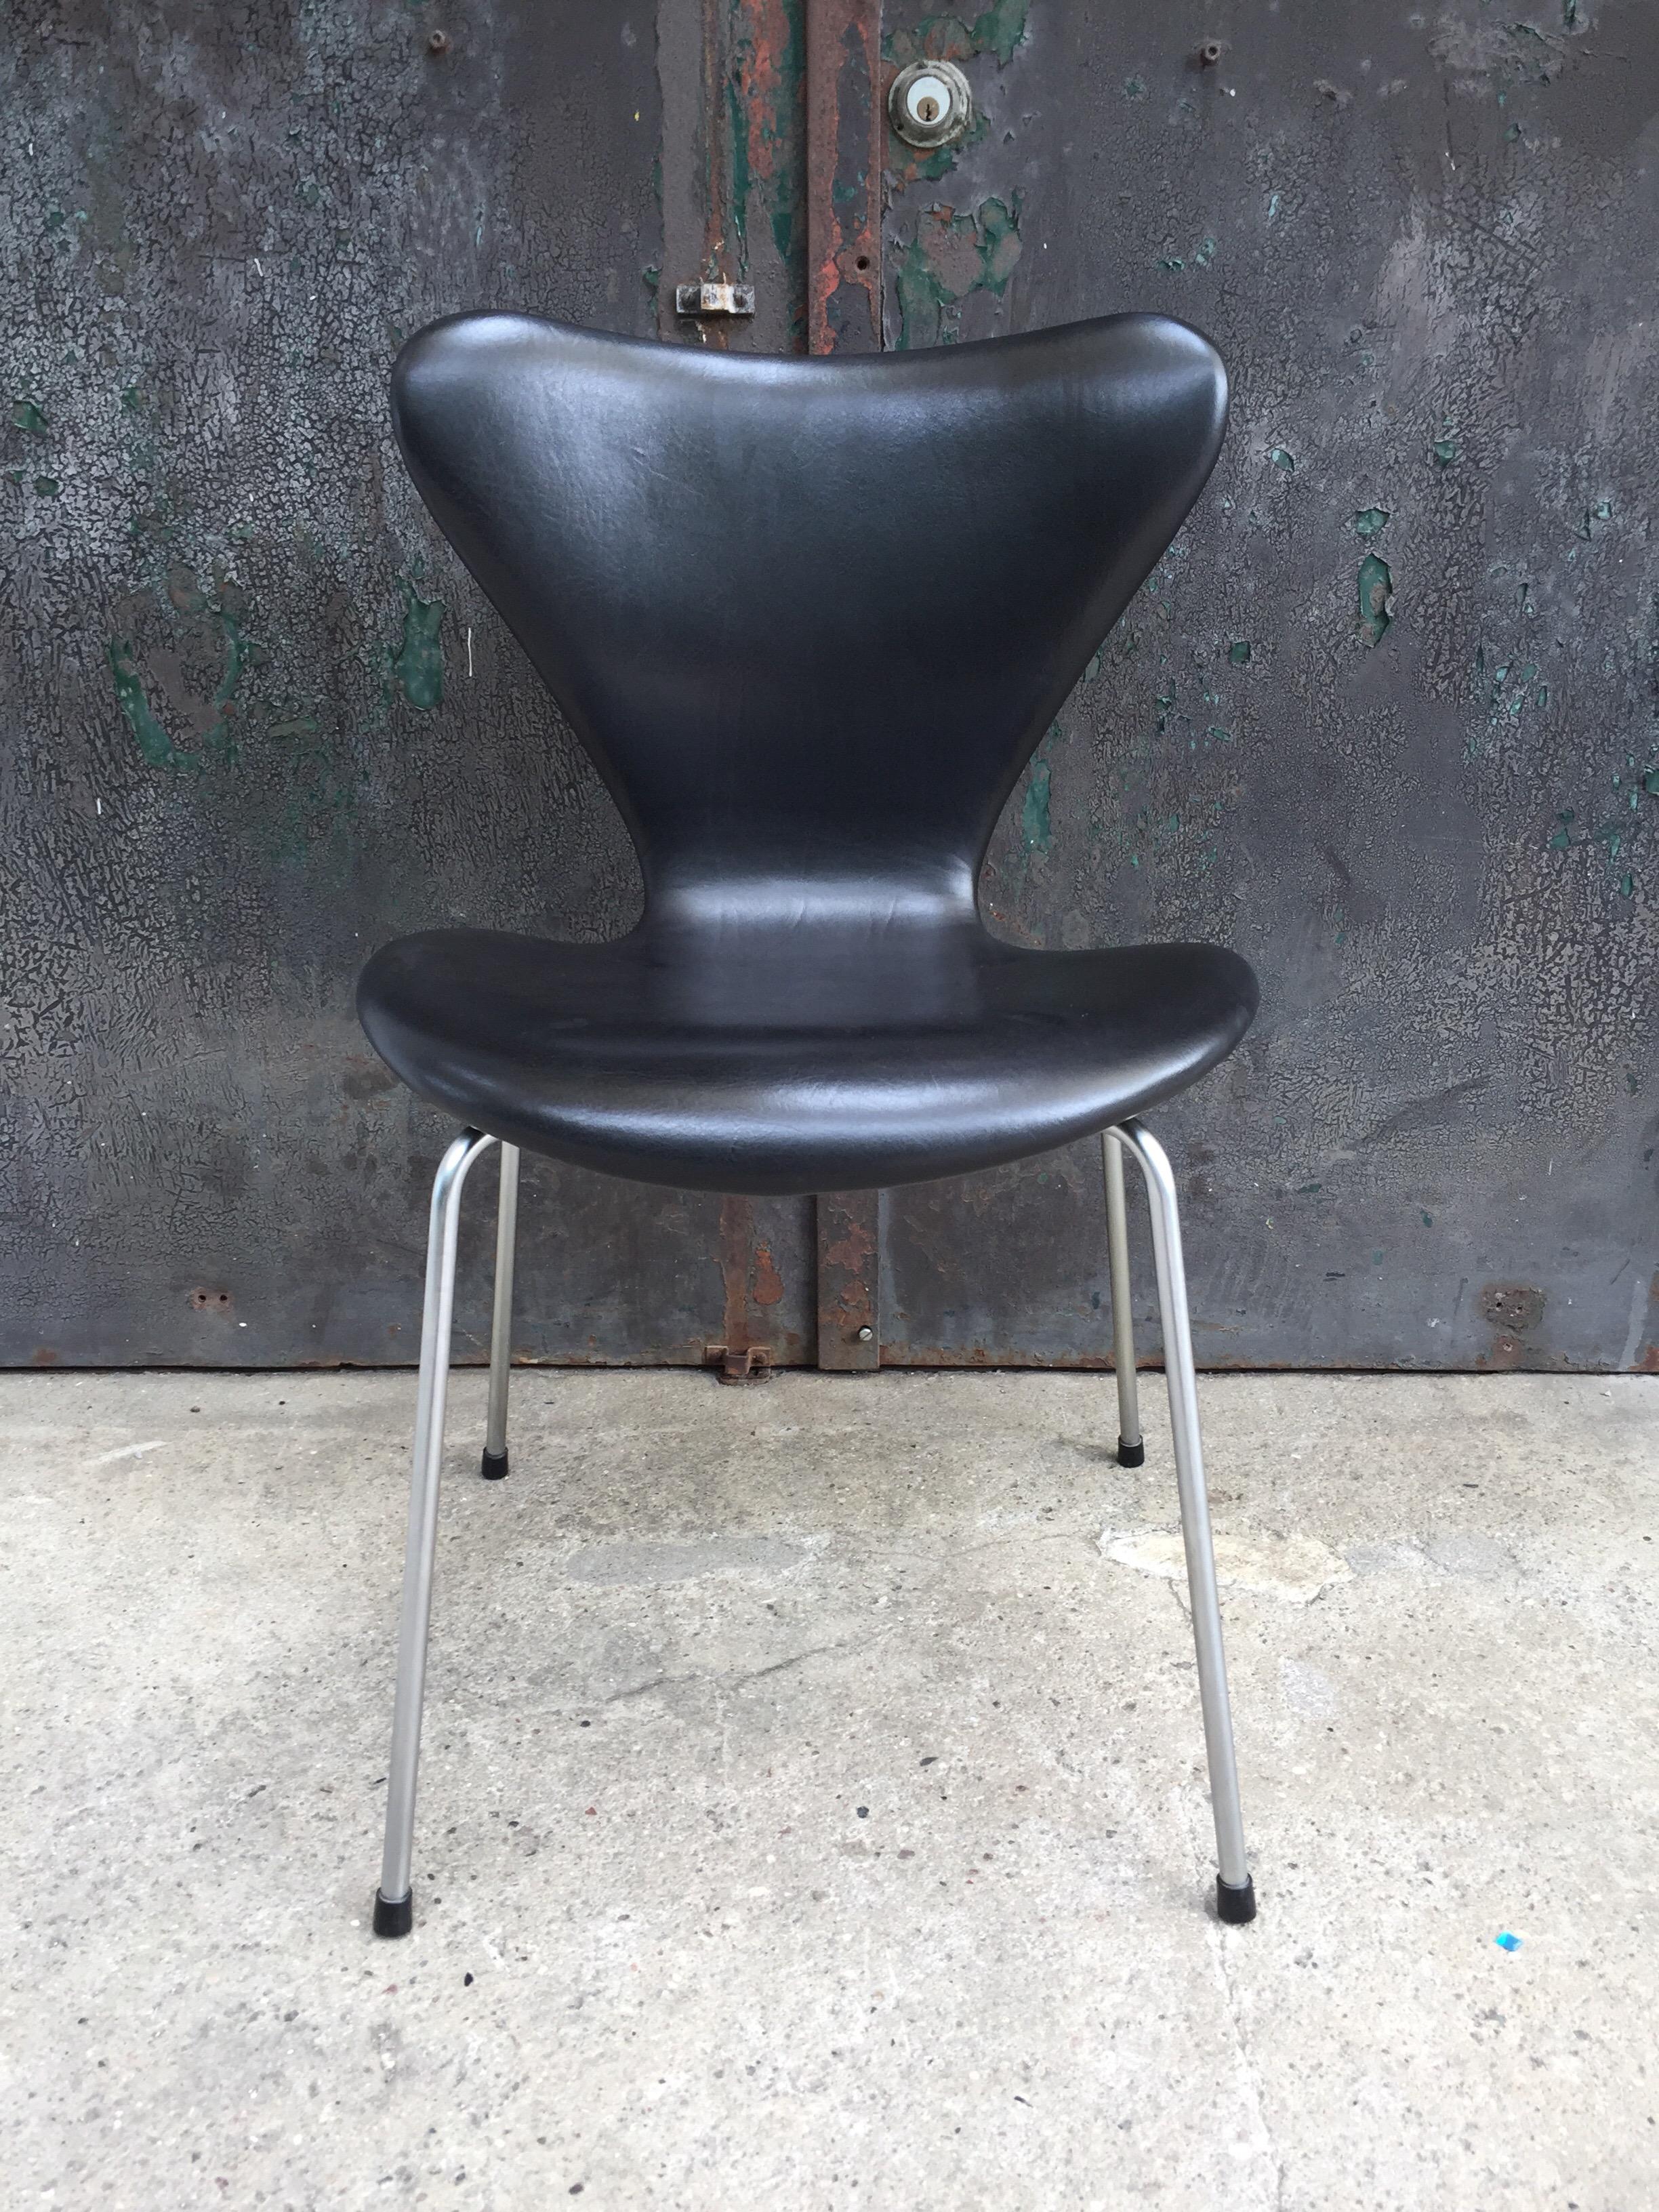 Arne Jacobsen 3107 chair designed in 1955 in original black leather and made by Fritz Hansen of Denmark.
Made form pressed wood covered in leather and mounted onto chromed tubular steel legs
These iconic chairs are in original vintage condition with